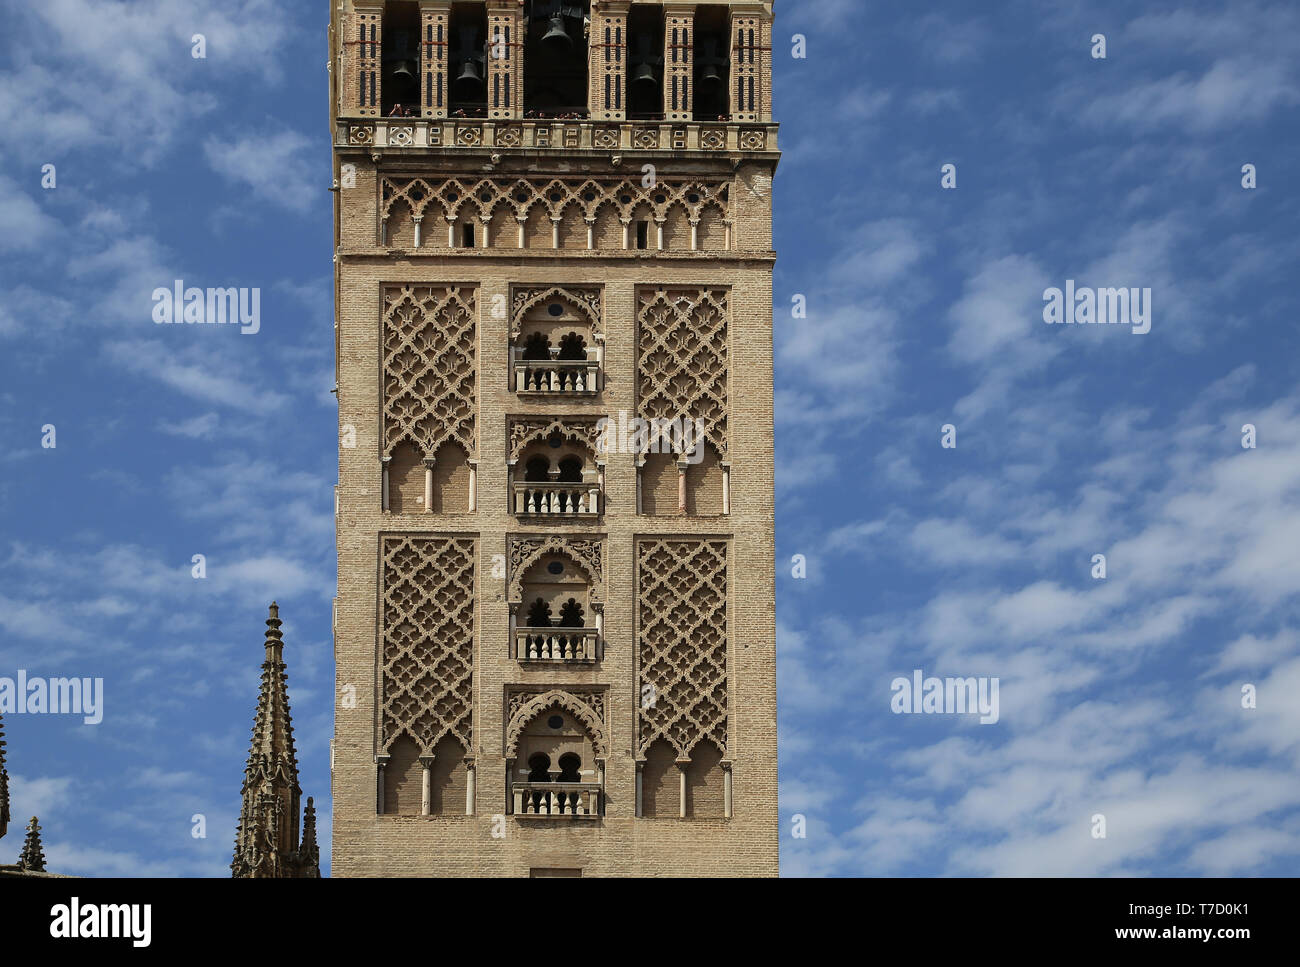 Spain. Andalusia. Seville. The Giralda Tower, ancient minaret of Great Mosque. Almohad style. 12th century. Seville Cathedral. Stock Photo